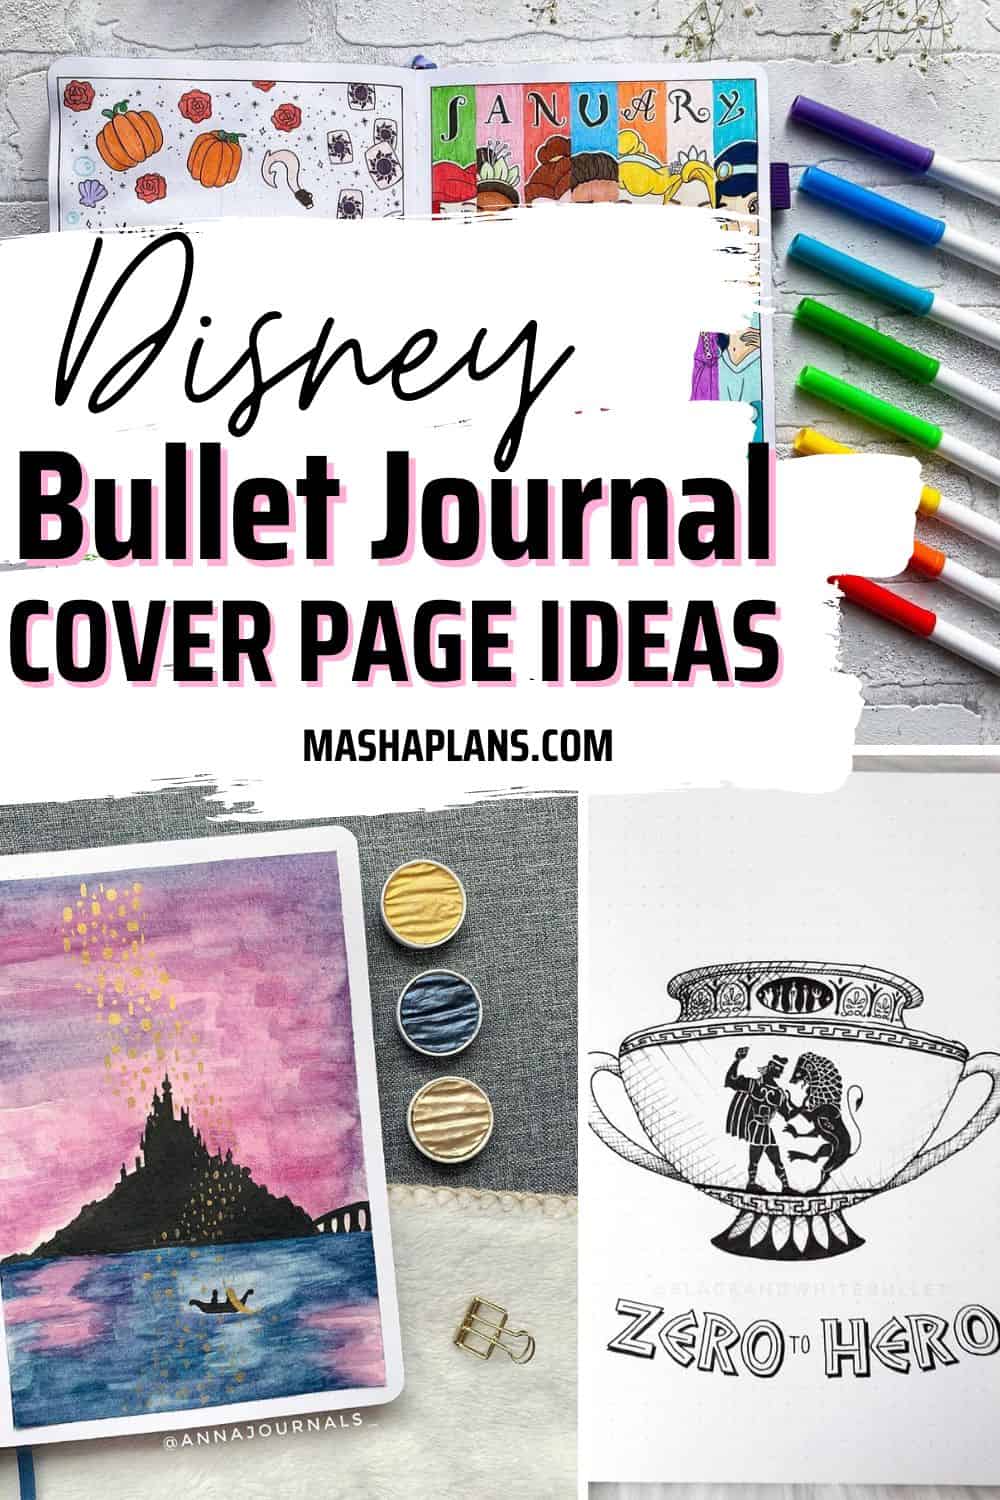 13 Bullet Journal Disney Cover Page Ideas